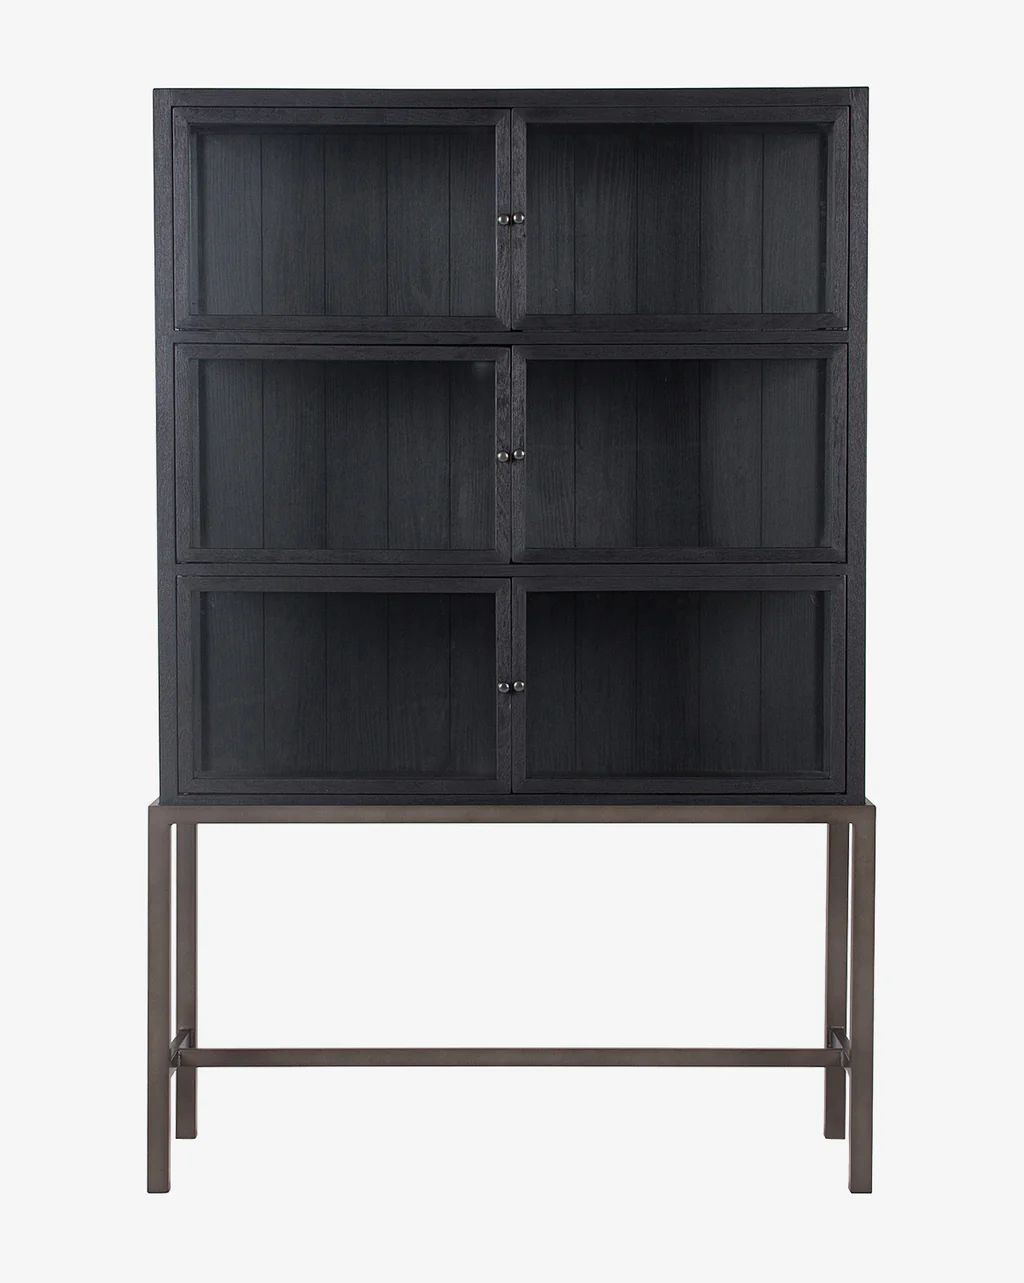 Lawley Cabinet | McGee & Co.